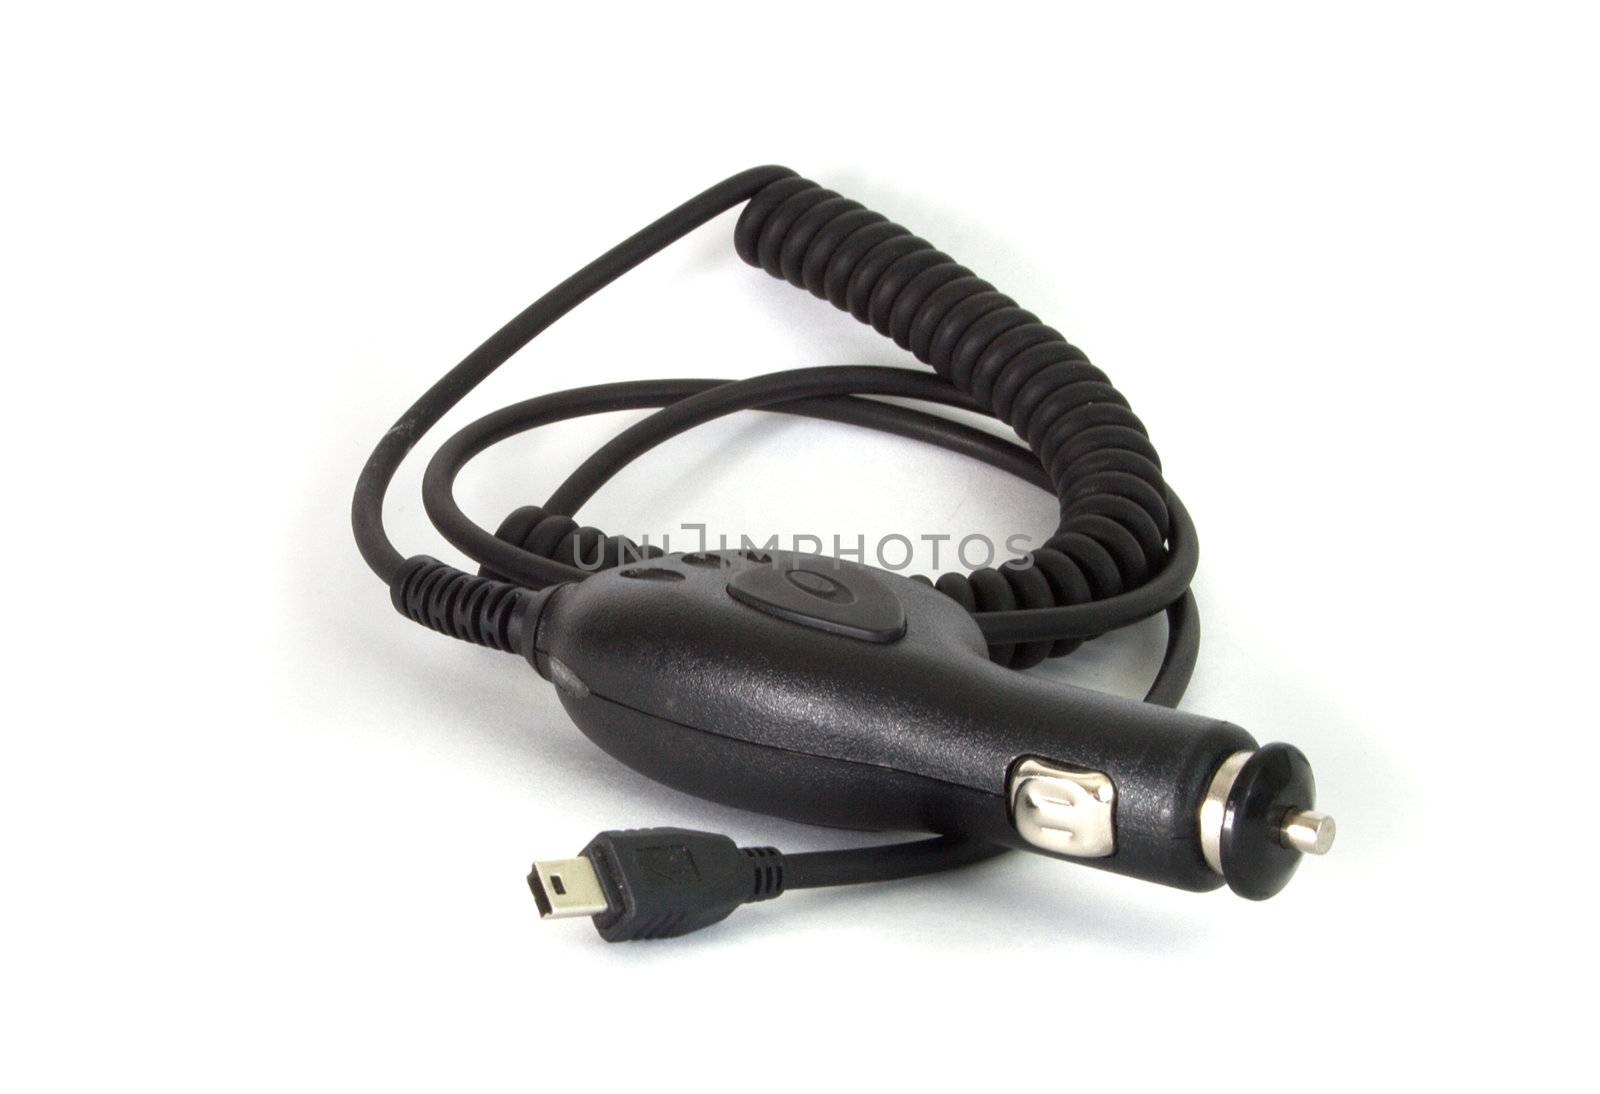 Automobile travel charger on white background